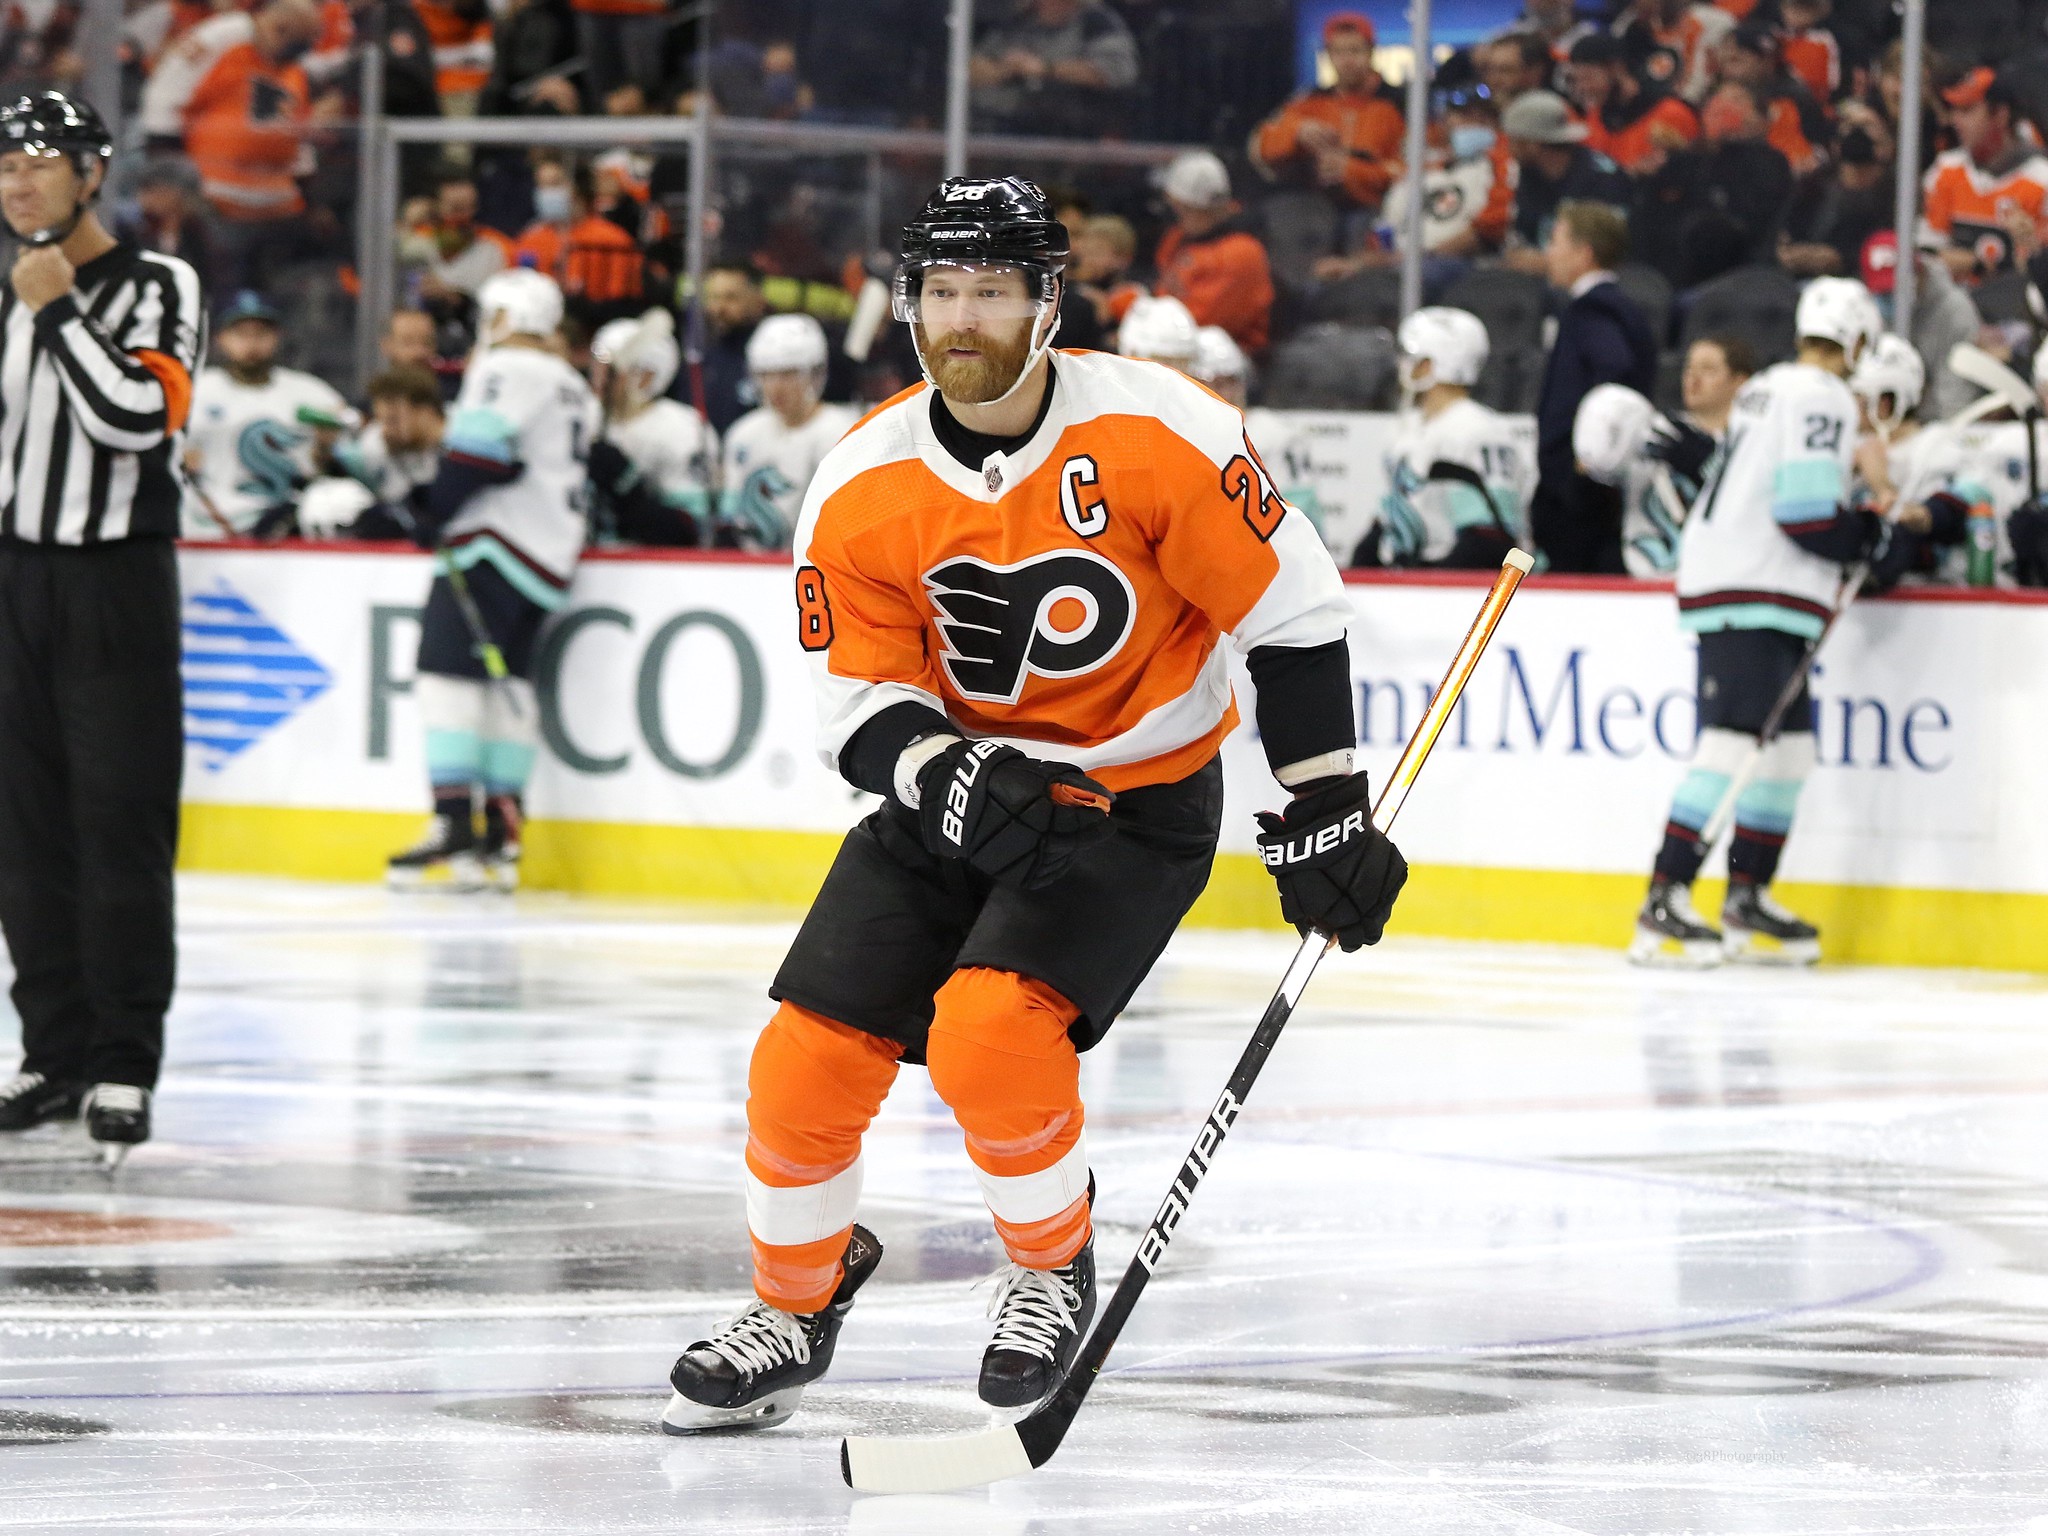 NHL - Born in Hearst, Ontario, Claude Giroux and his family moved